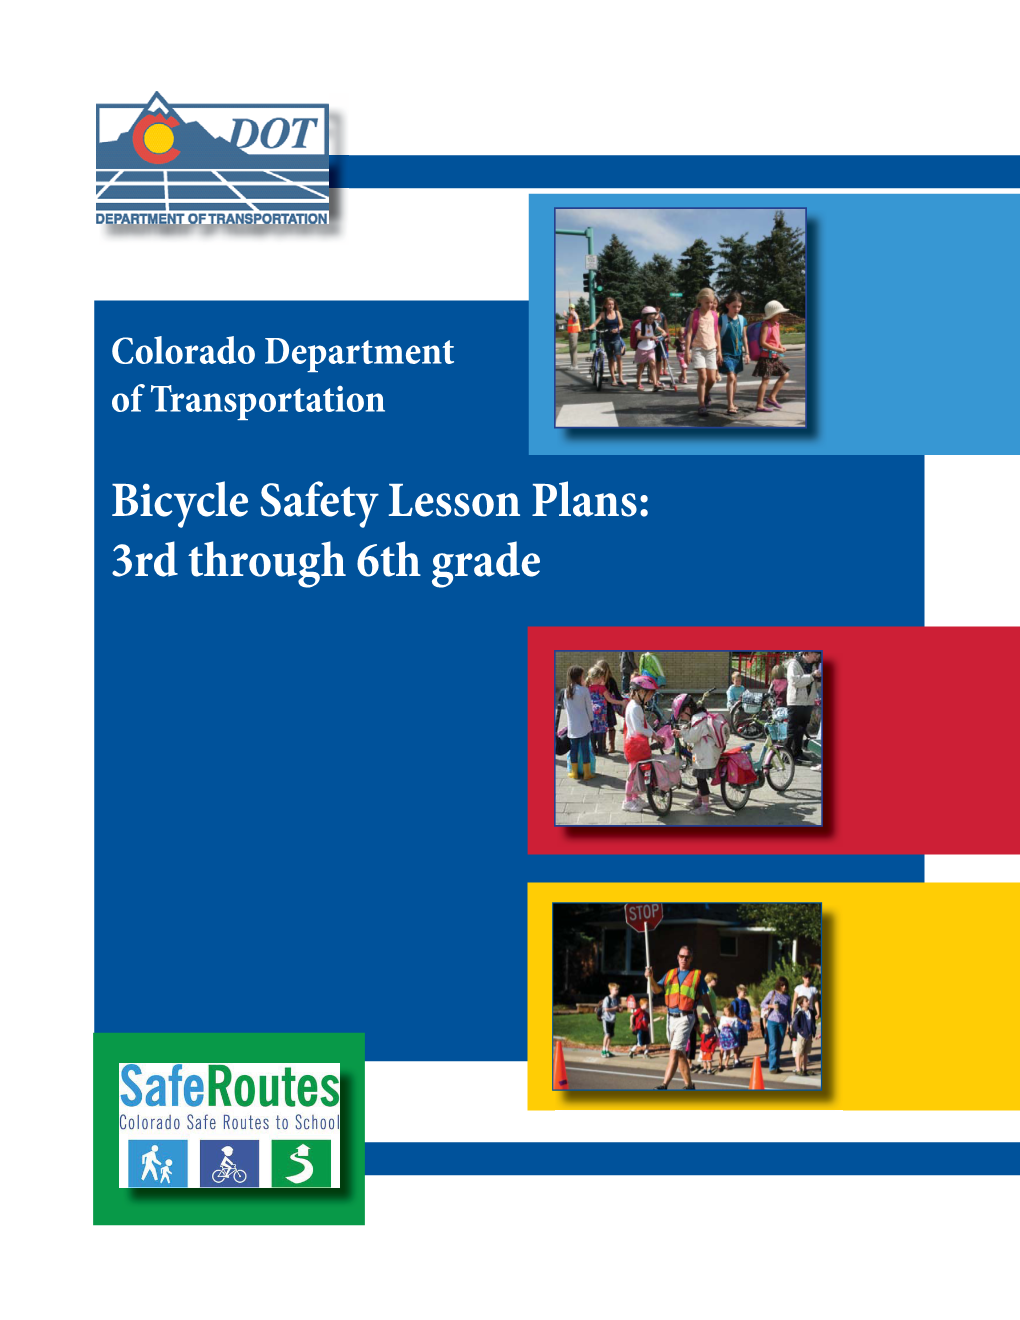 Bicycle Safety Lesson Plans: 3Rd Through 6Th Grade Photo Credits: Sprinkle Consulting, Inc